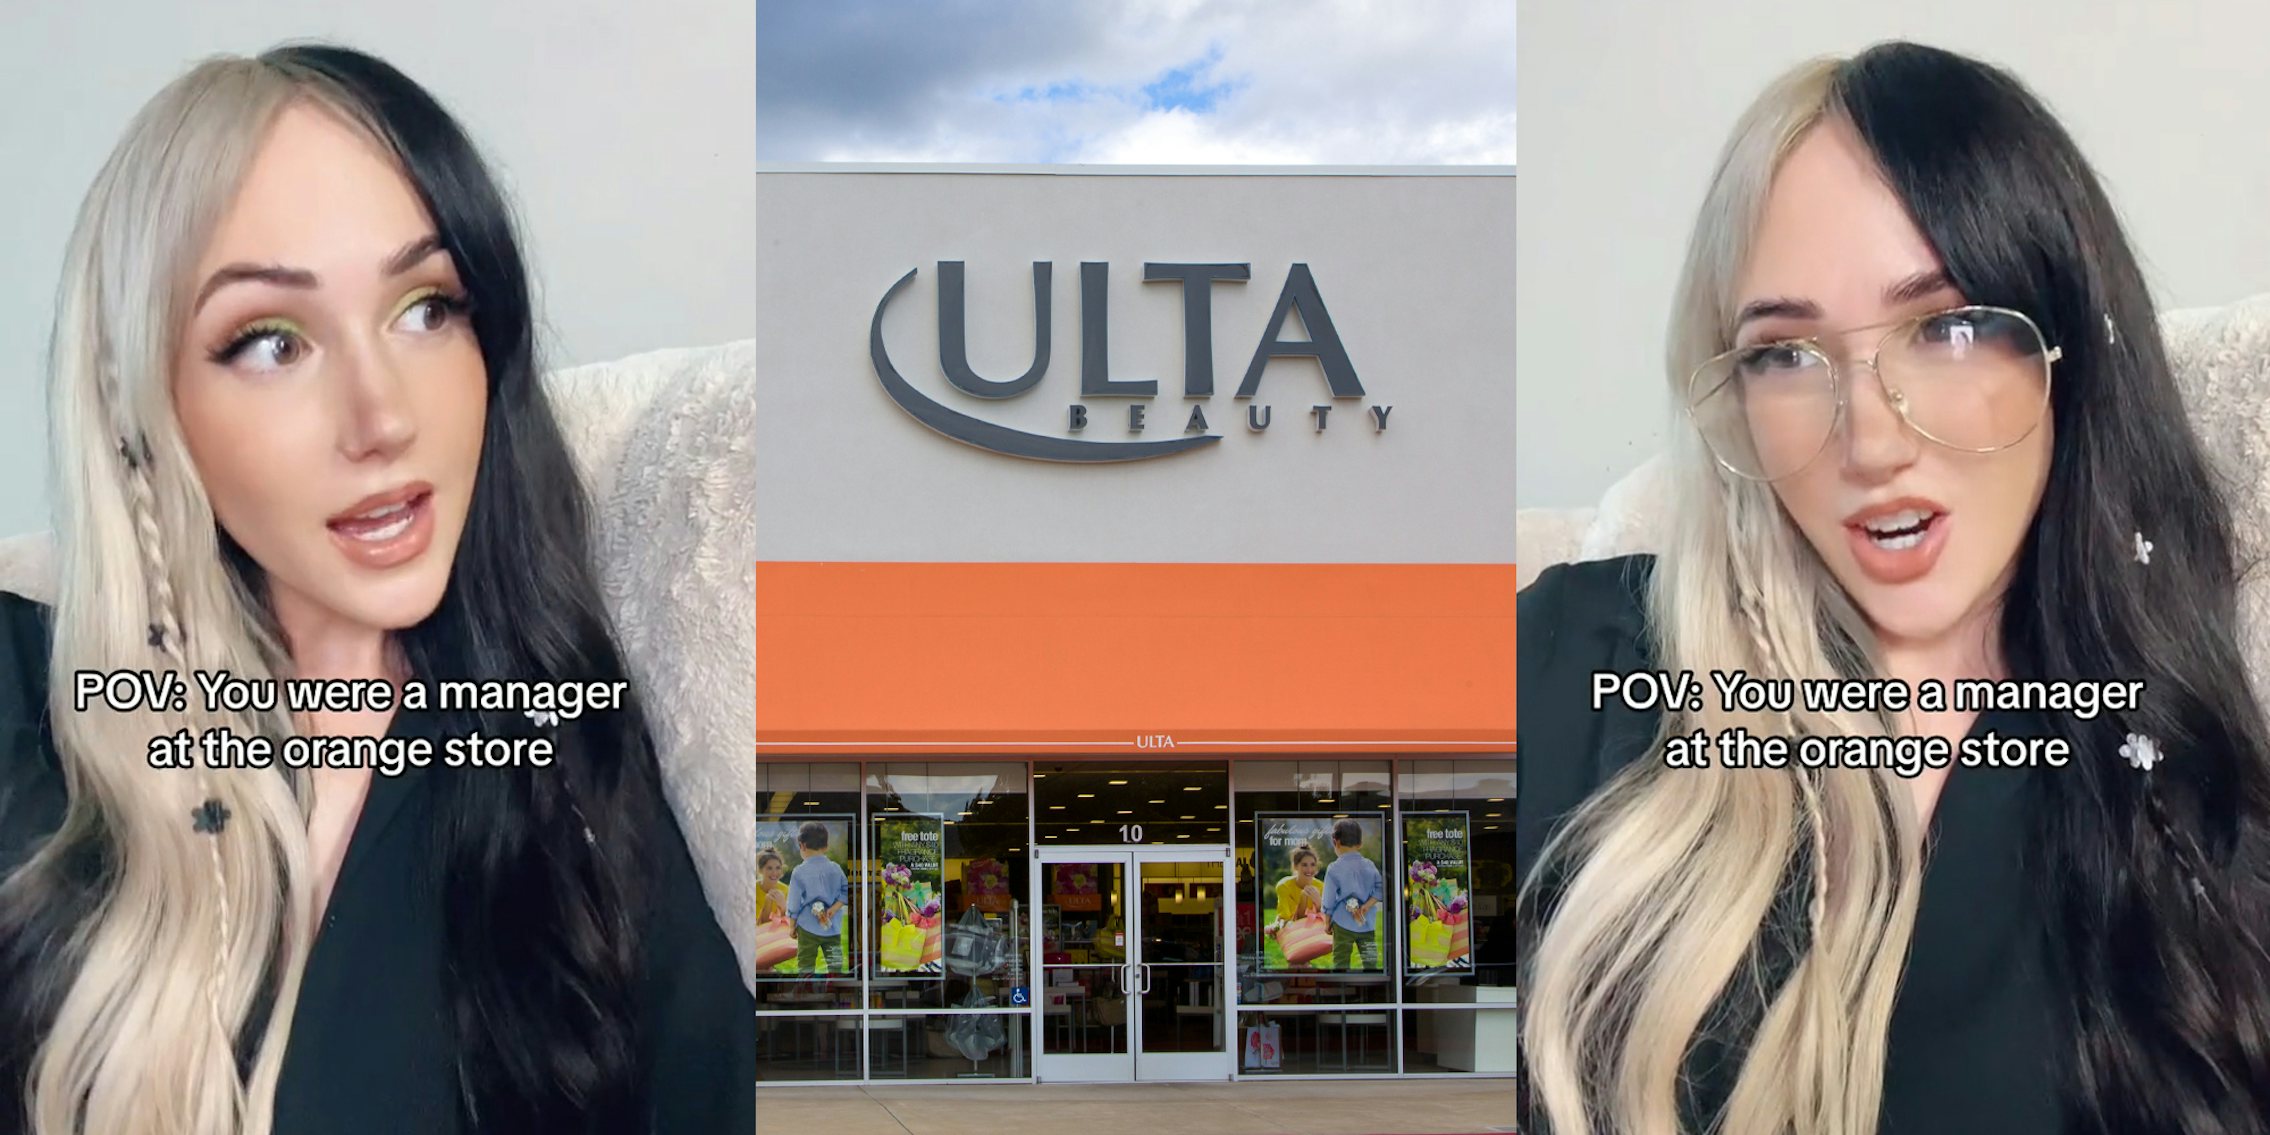 Ulta employee speaking with caption 'POV: You were a manager at the orange store' (l) Ulta entrance with sign (c) Ulta employee speaking with caption 'POV: You were a manager at the orange store' (r)